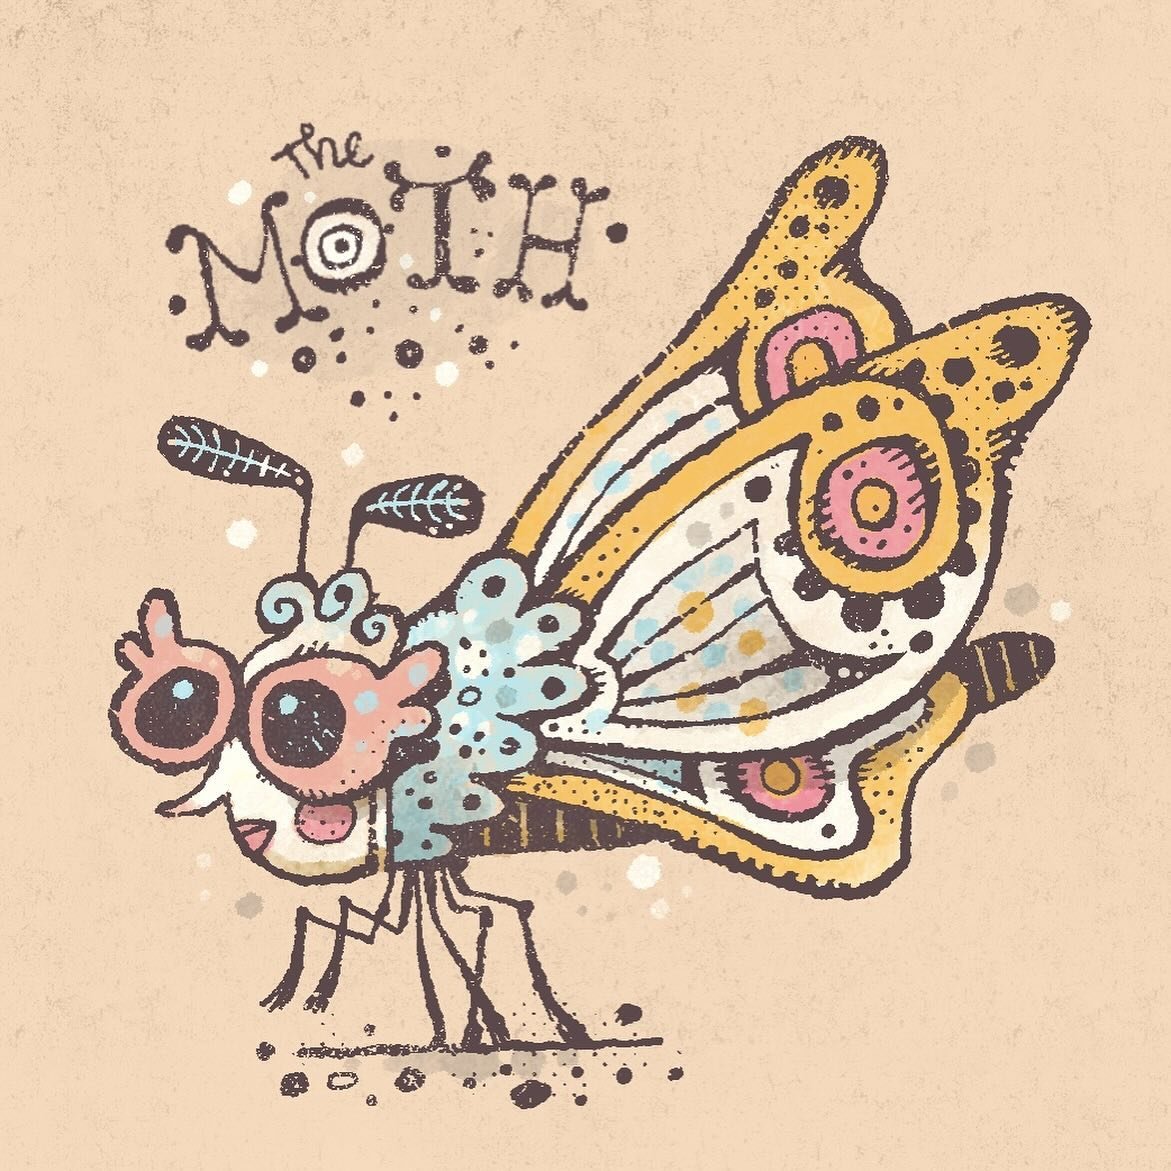 Moth is a character in a book I&rsquo;m writing. I&rsquo;ve been struggling with this story for a while, and the other night @snadorno had some suggestions that loosened the knots and got things going. 
I&rsquo;ll be writing about this, and writing f